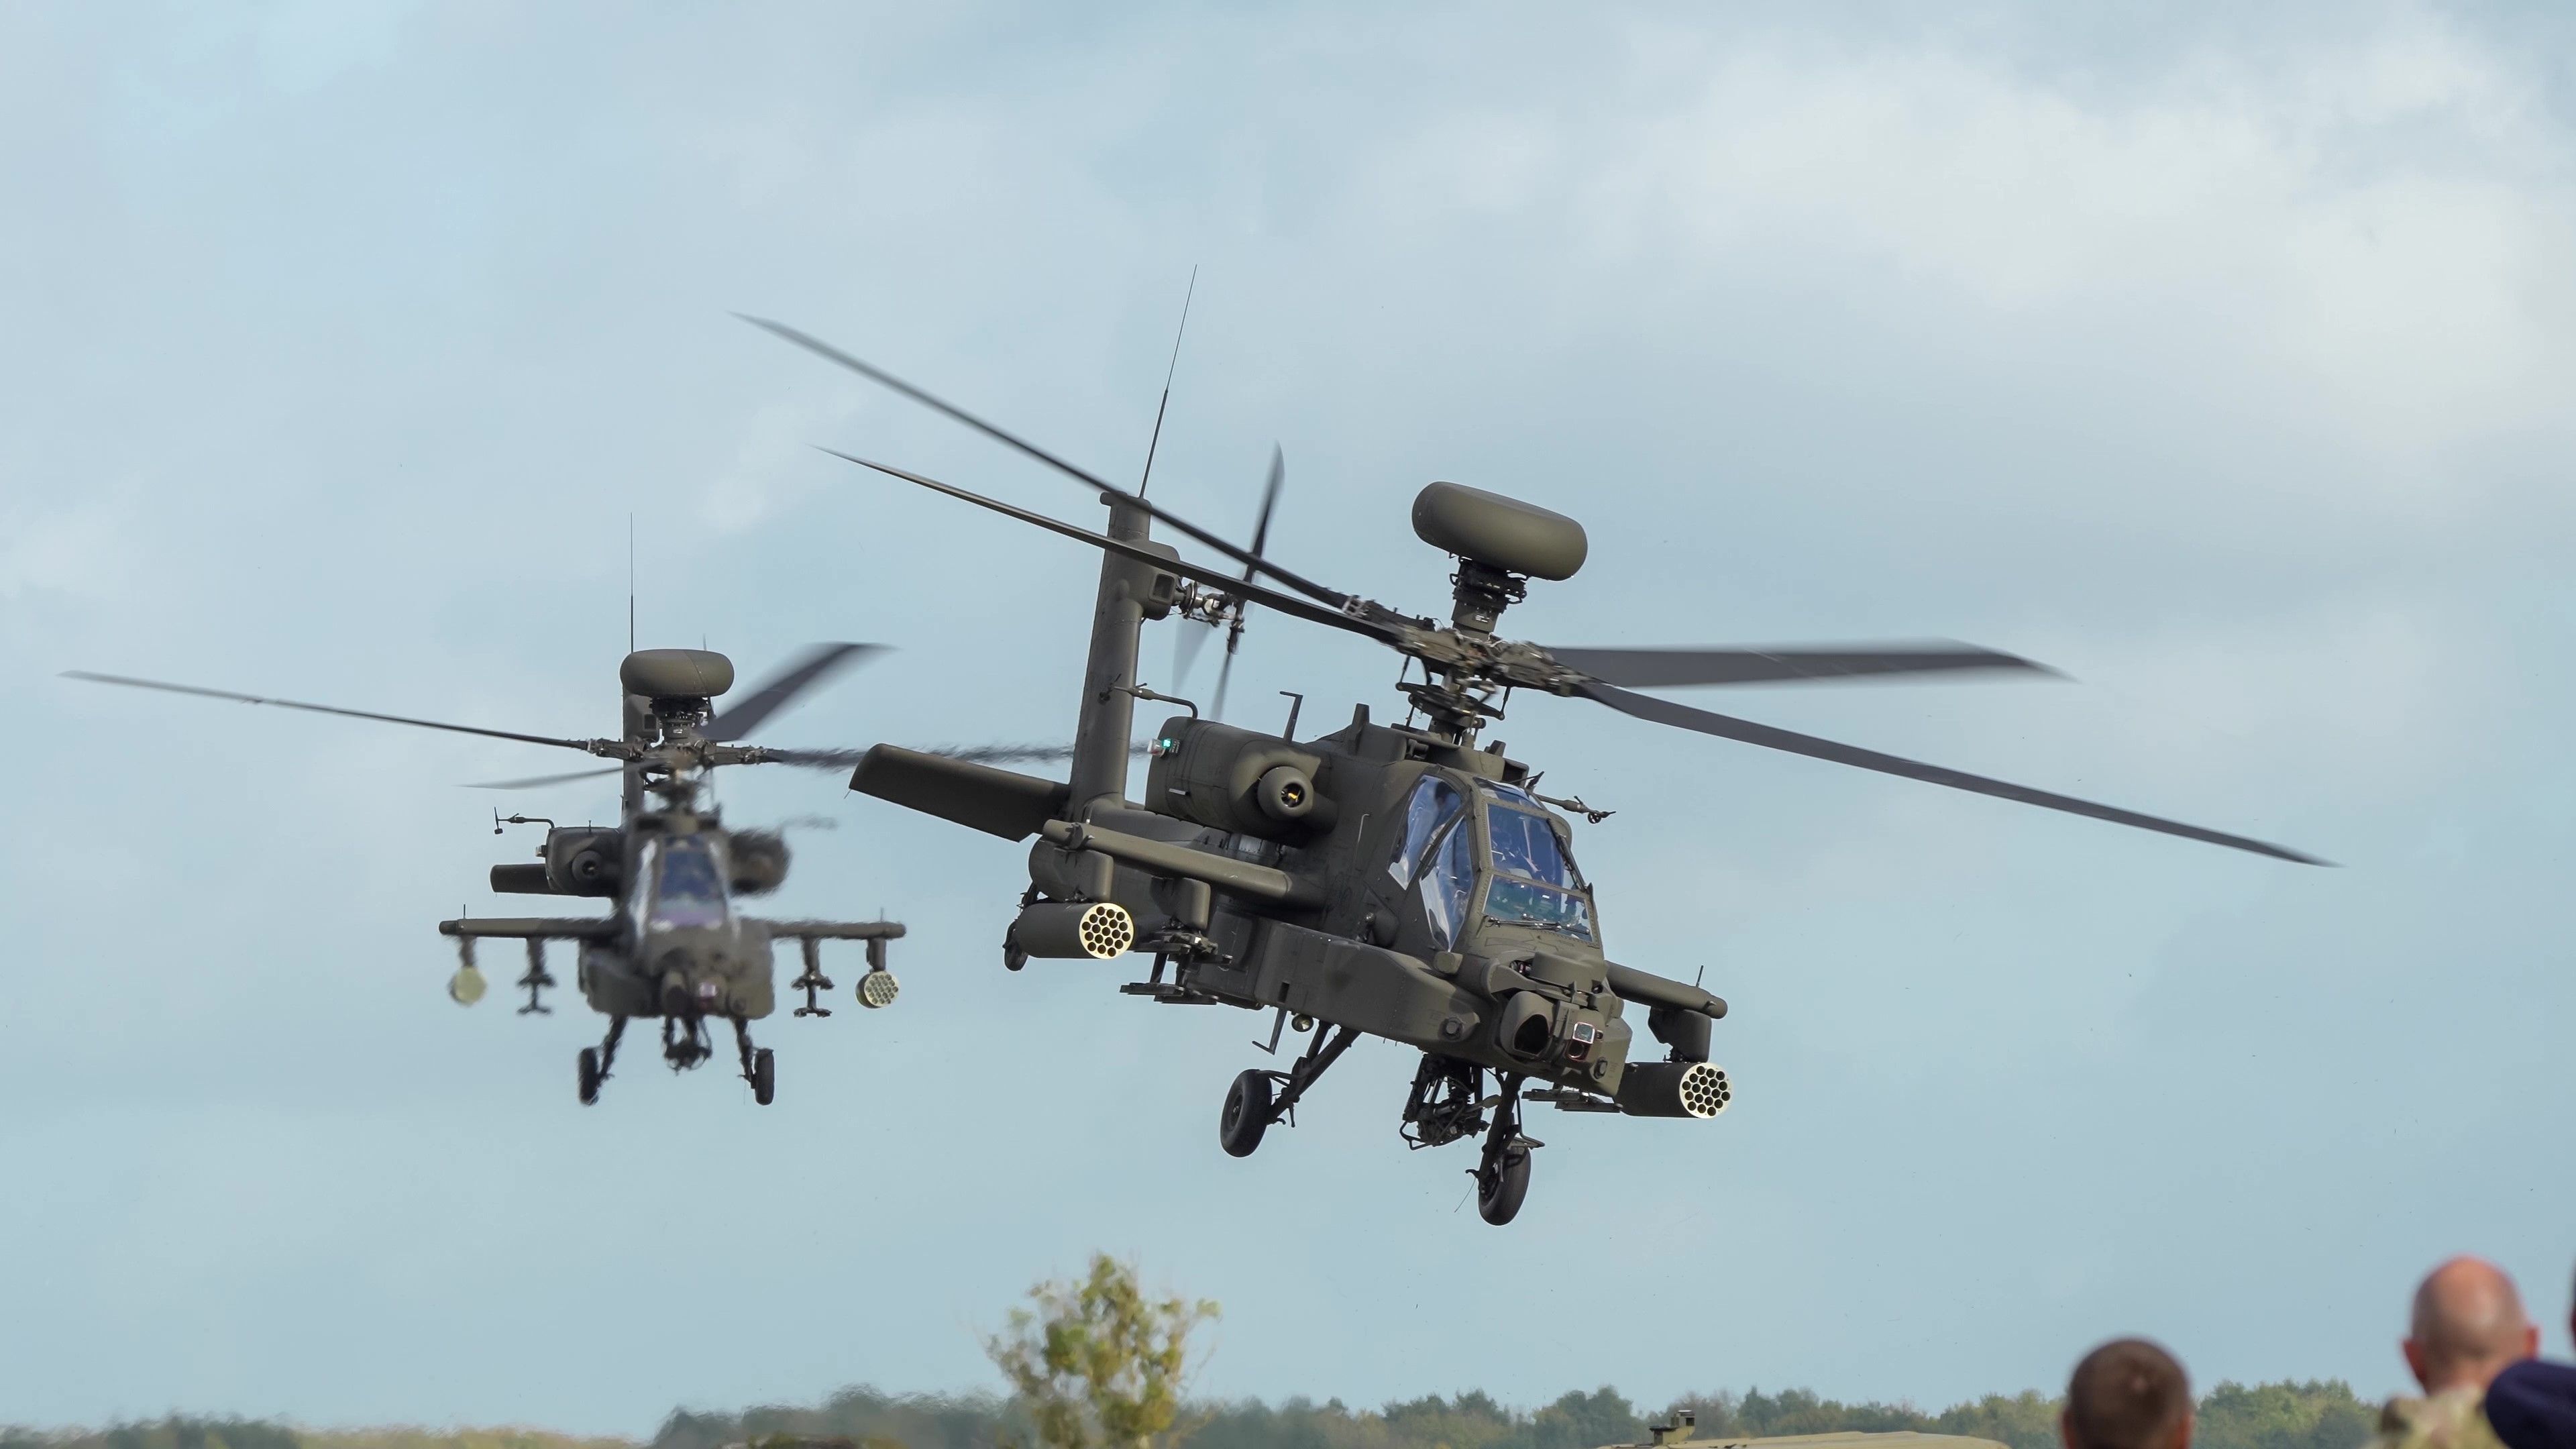 close-up head-on of two British army Boeing Apache Attack helicopters (AH-64E) transition to low level flight, Wiltshire UK